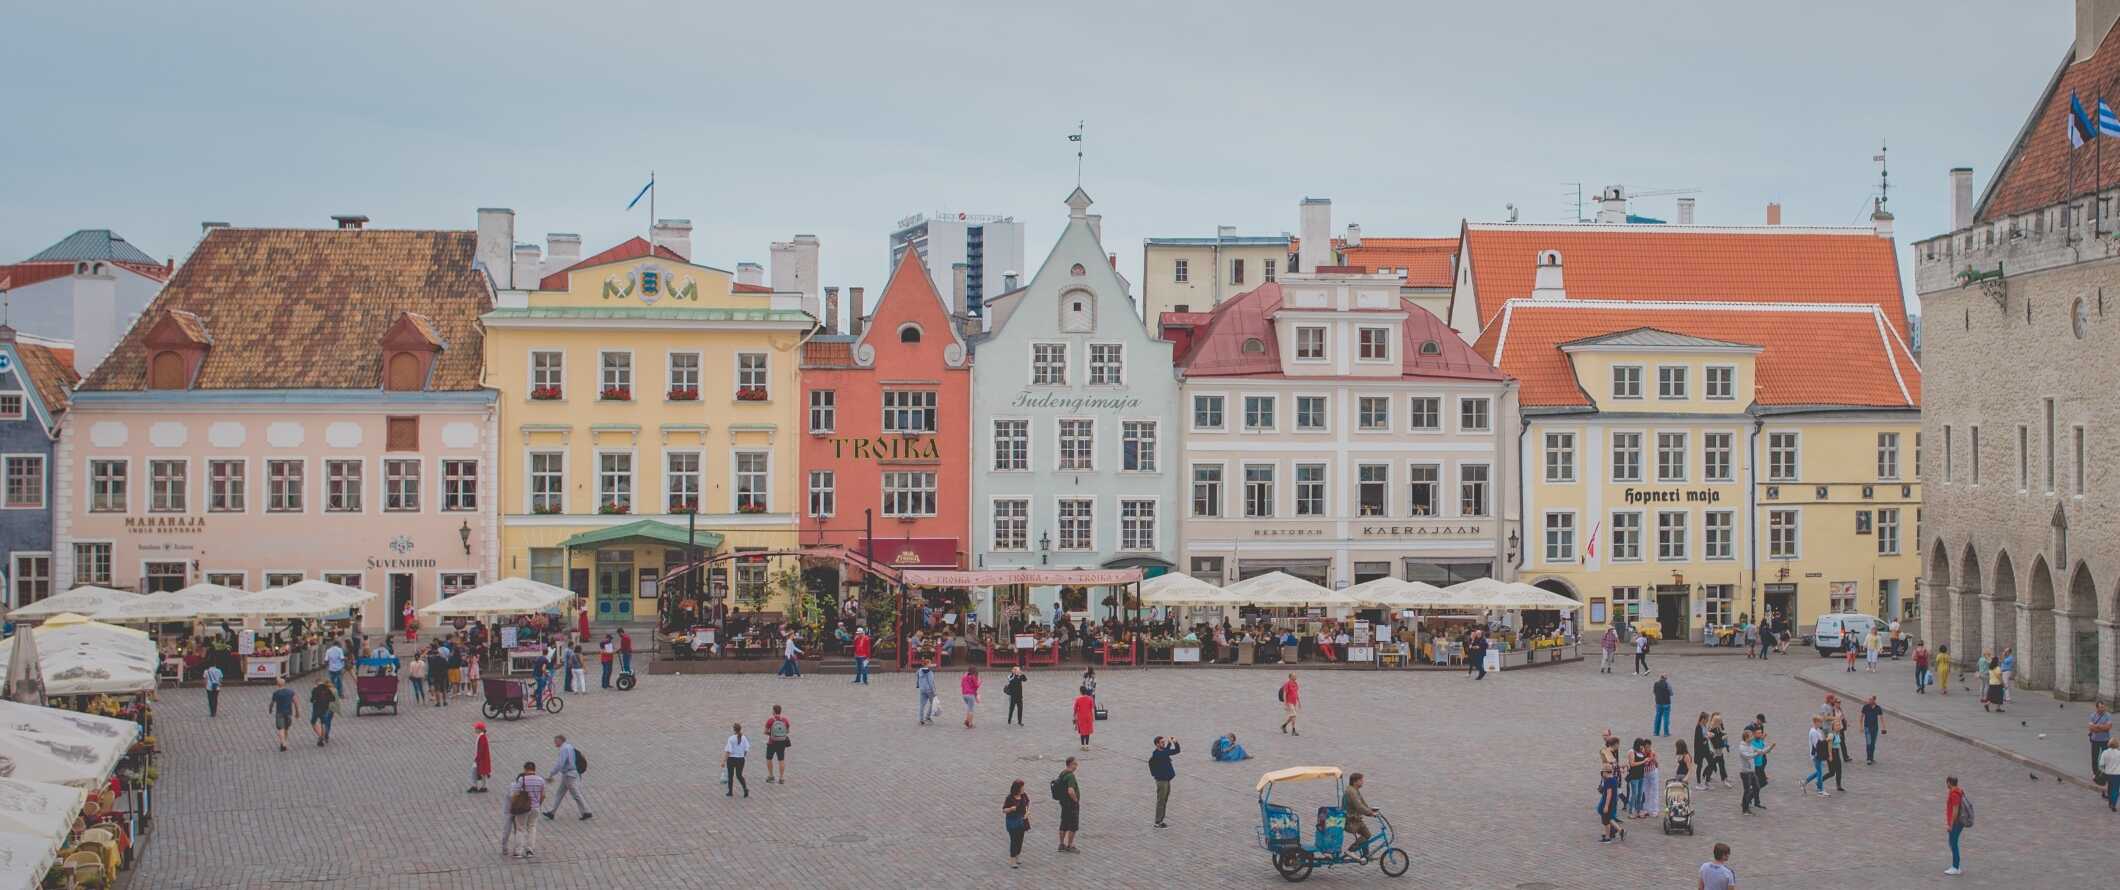 The central square lined with pastel-colored buildings in the Old Town of Tallinn, Estonia